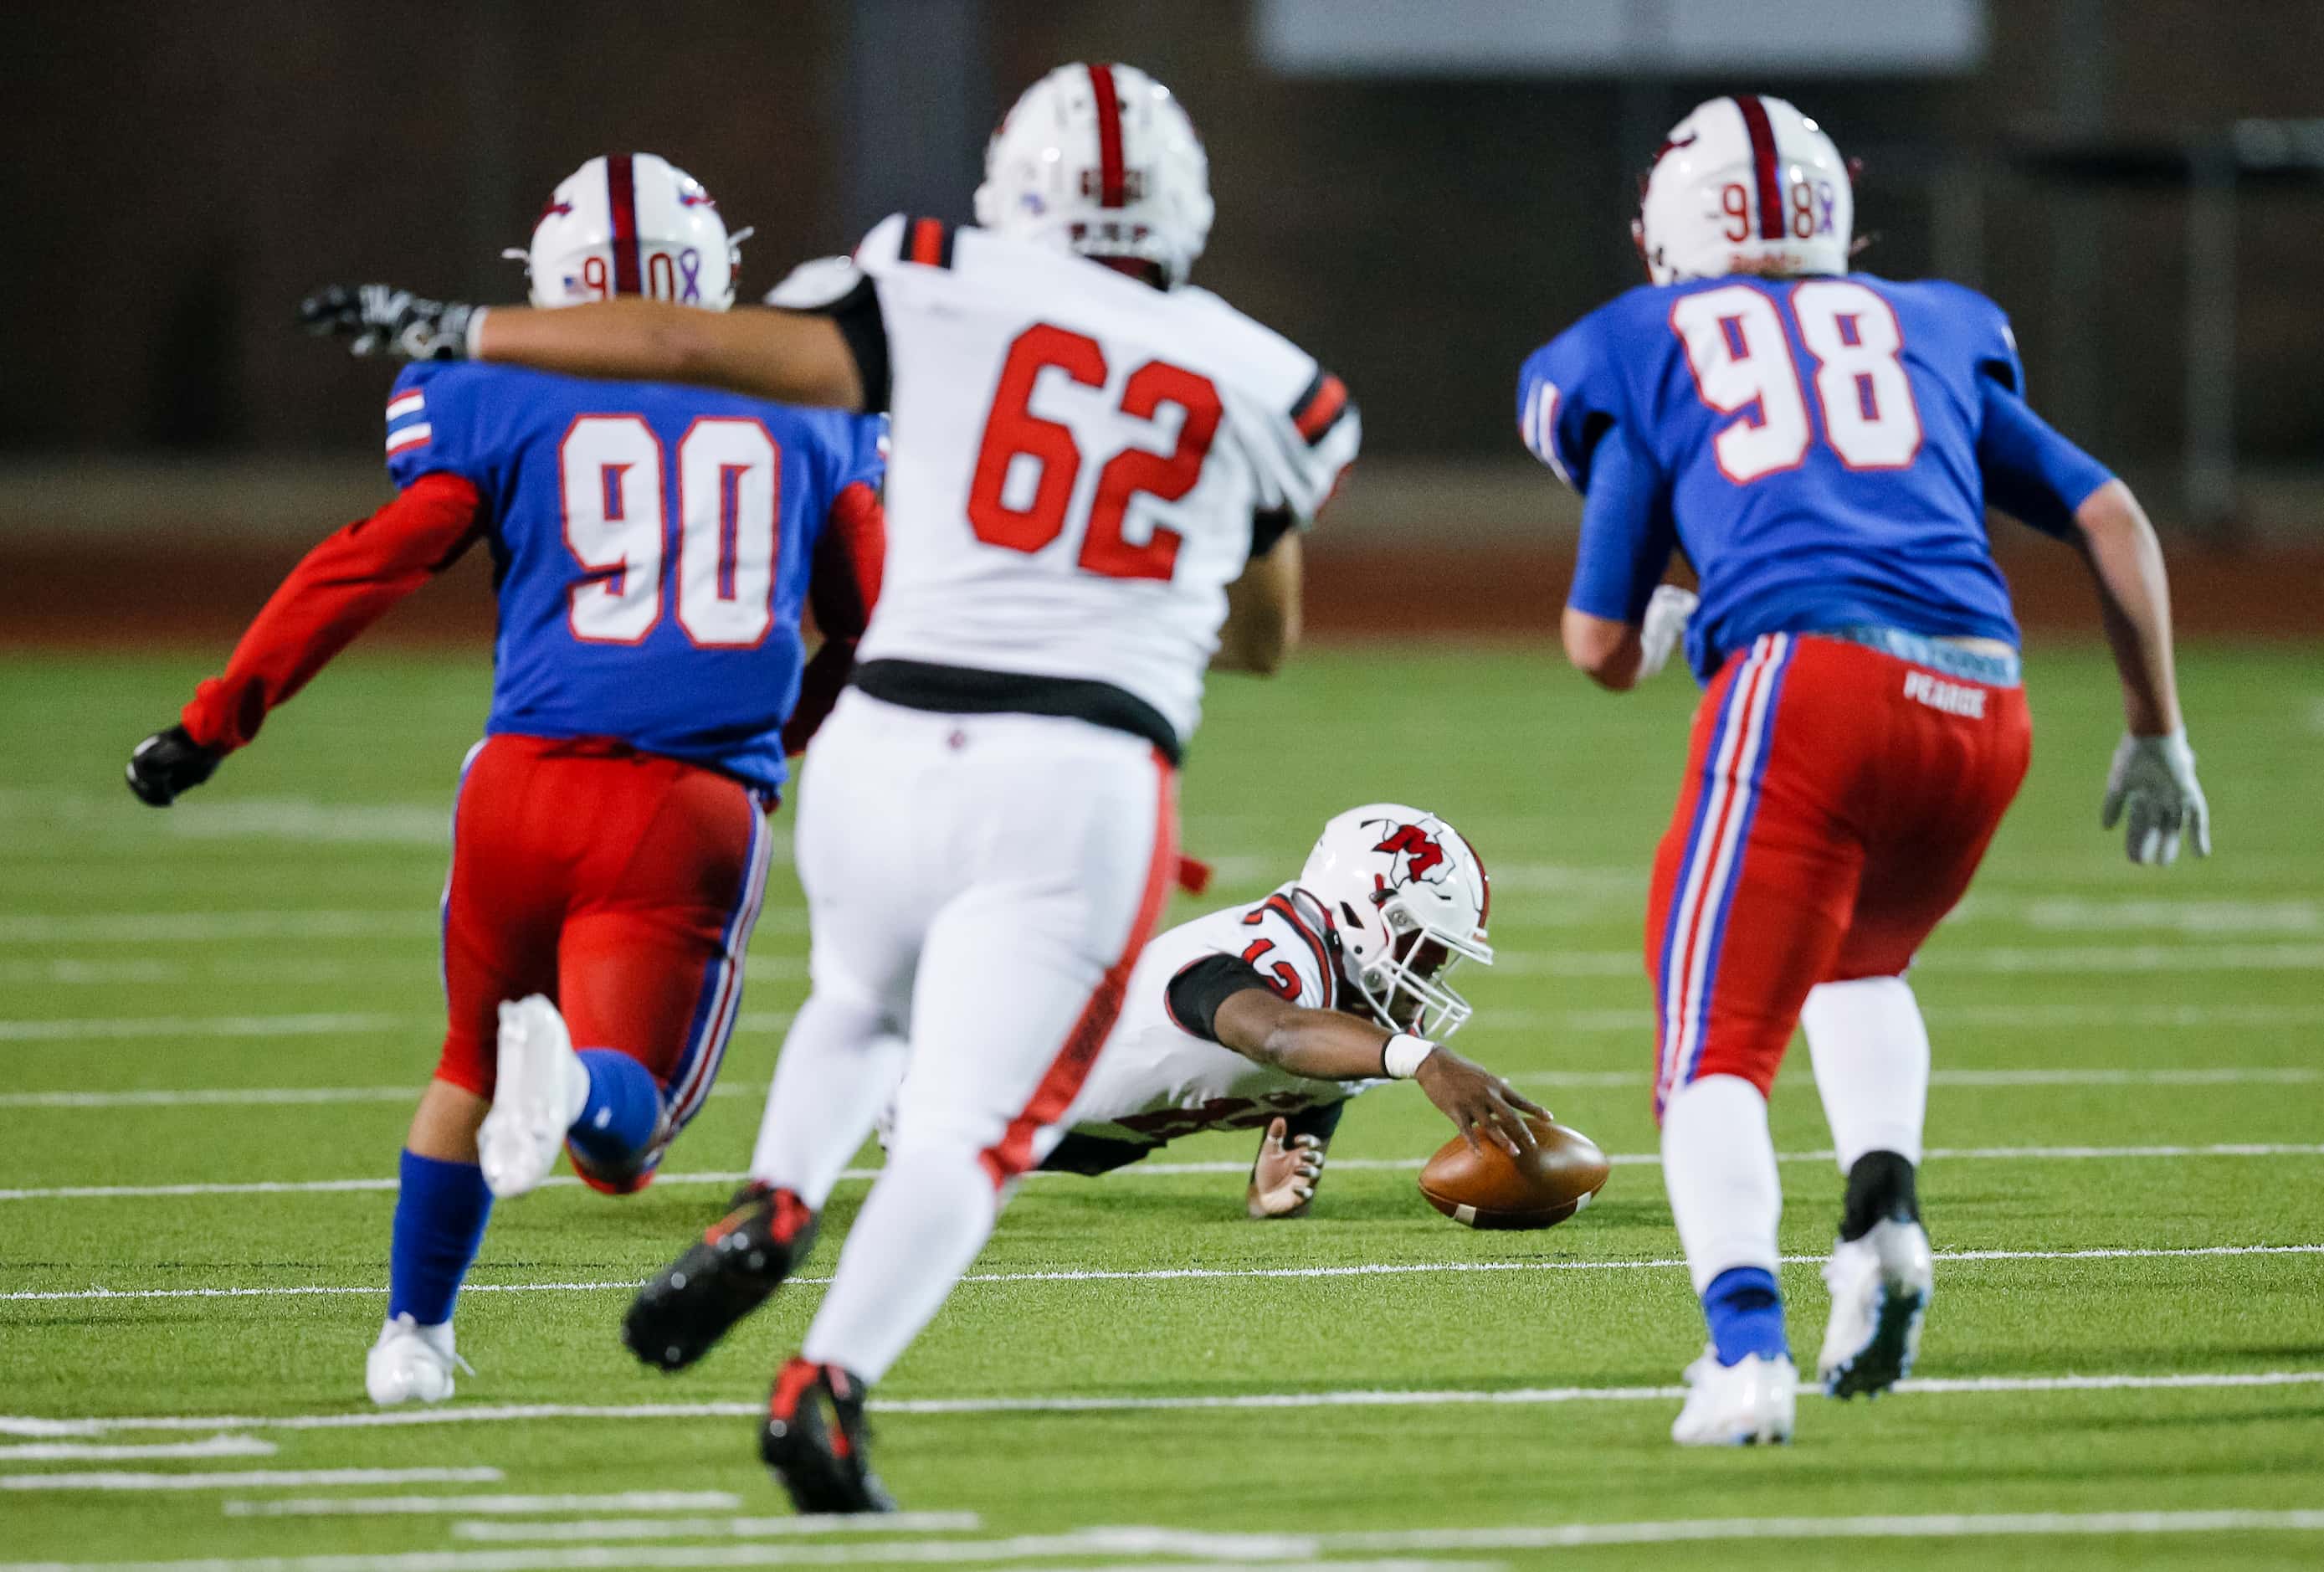 Irving MacArthur sophomore quarterback Kylale Flye (12) recovers the ball after a bad snap...